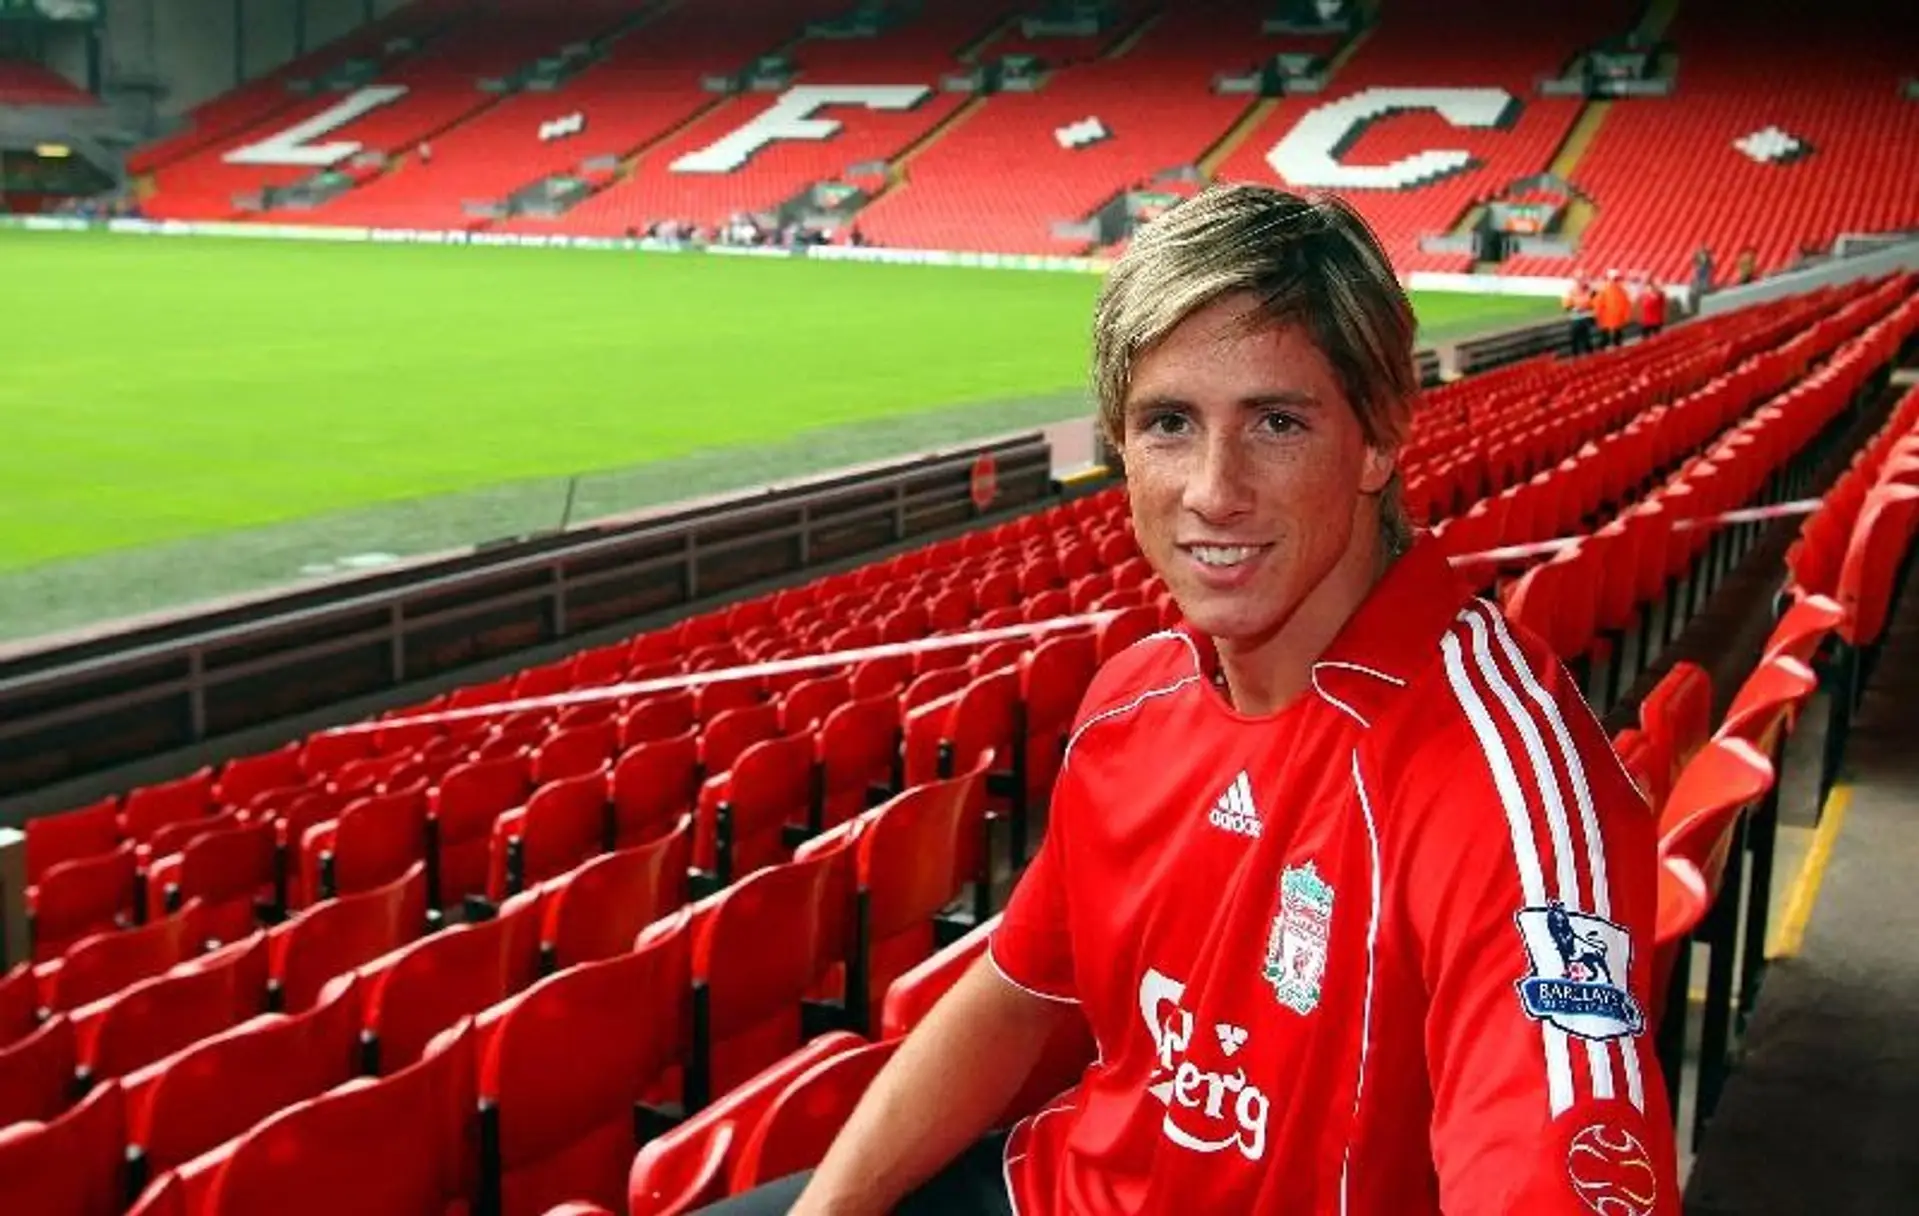 His armband said he was a Red! 13 years ago Fernando Torres signed for Liverpool